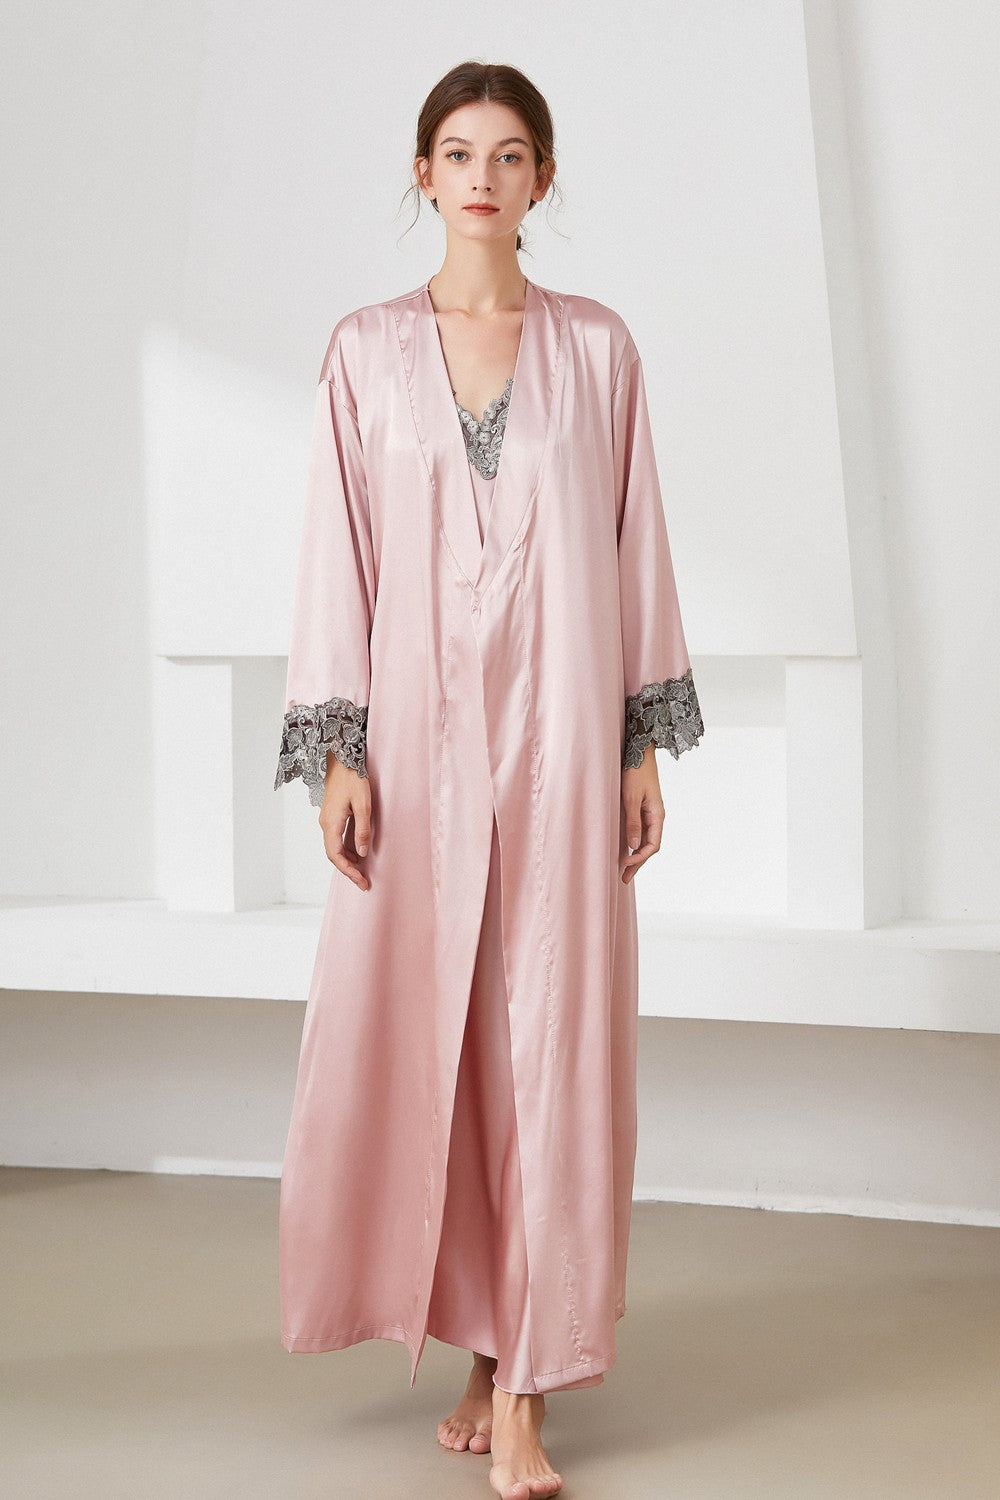 Woman standing wearing pink satin nightdress and matching robe with lace trim